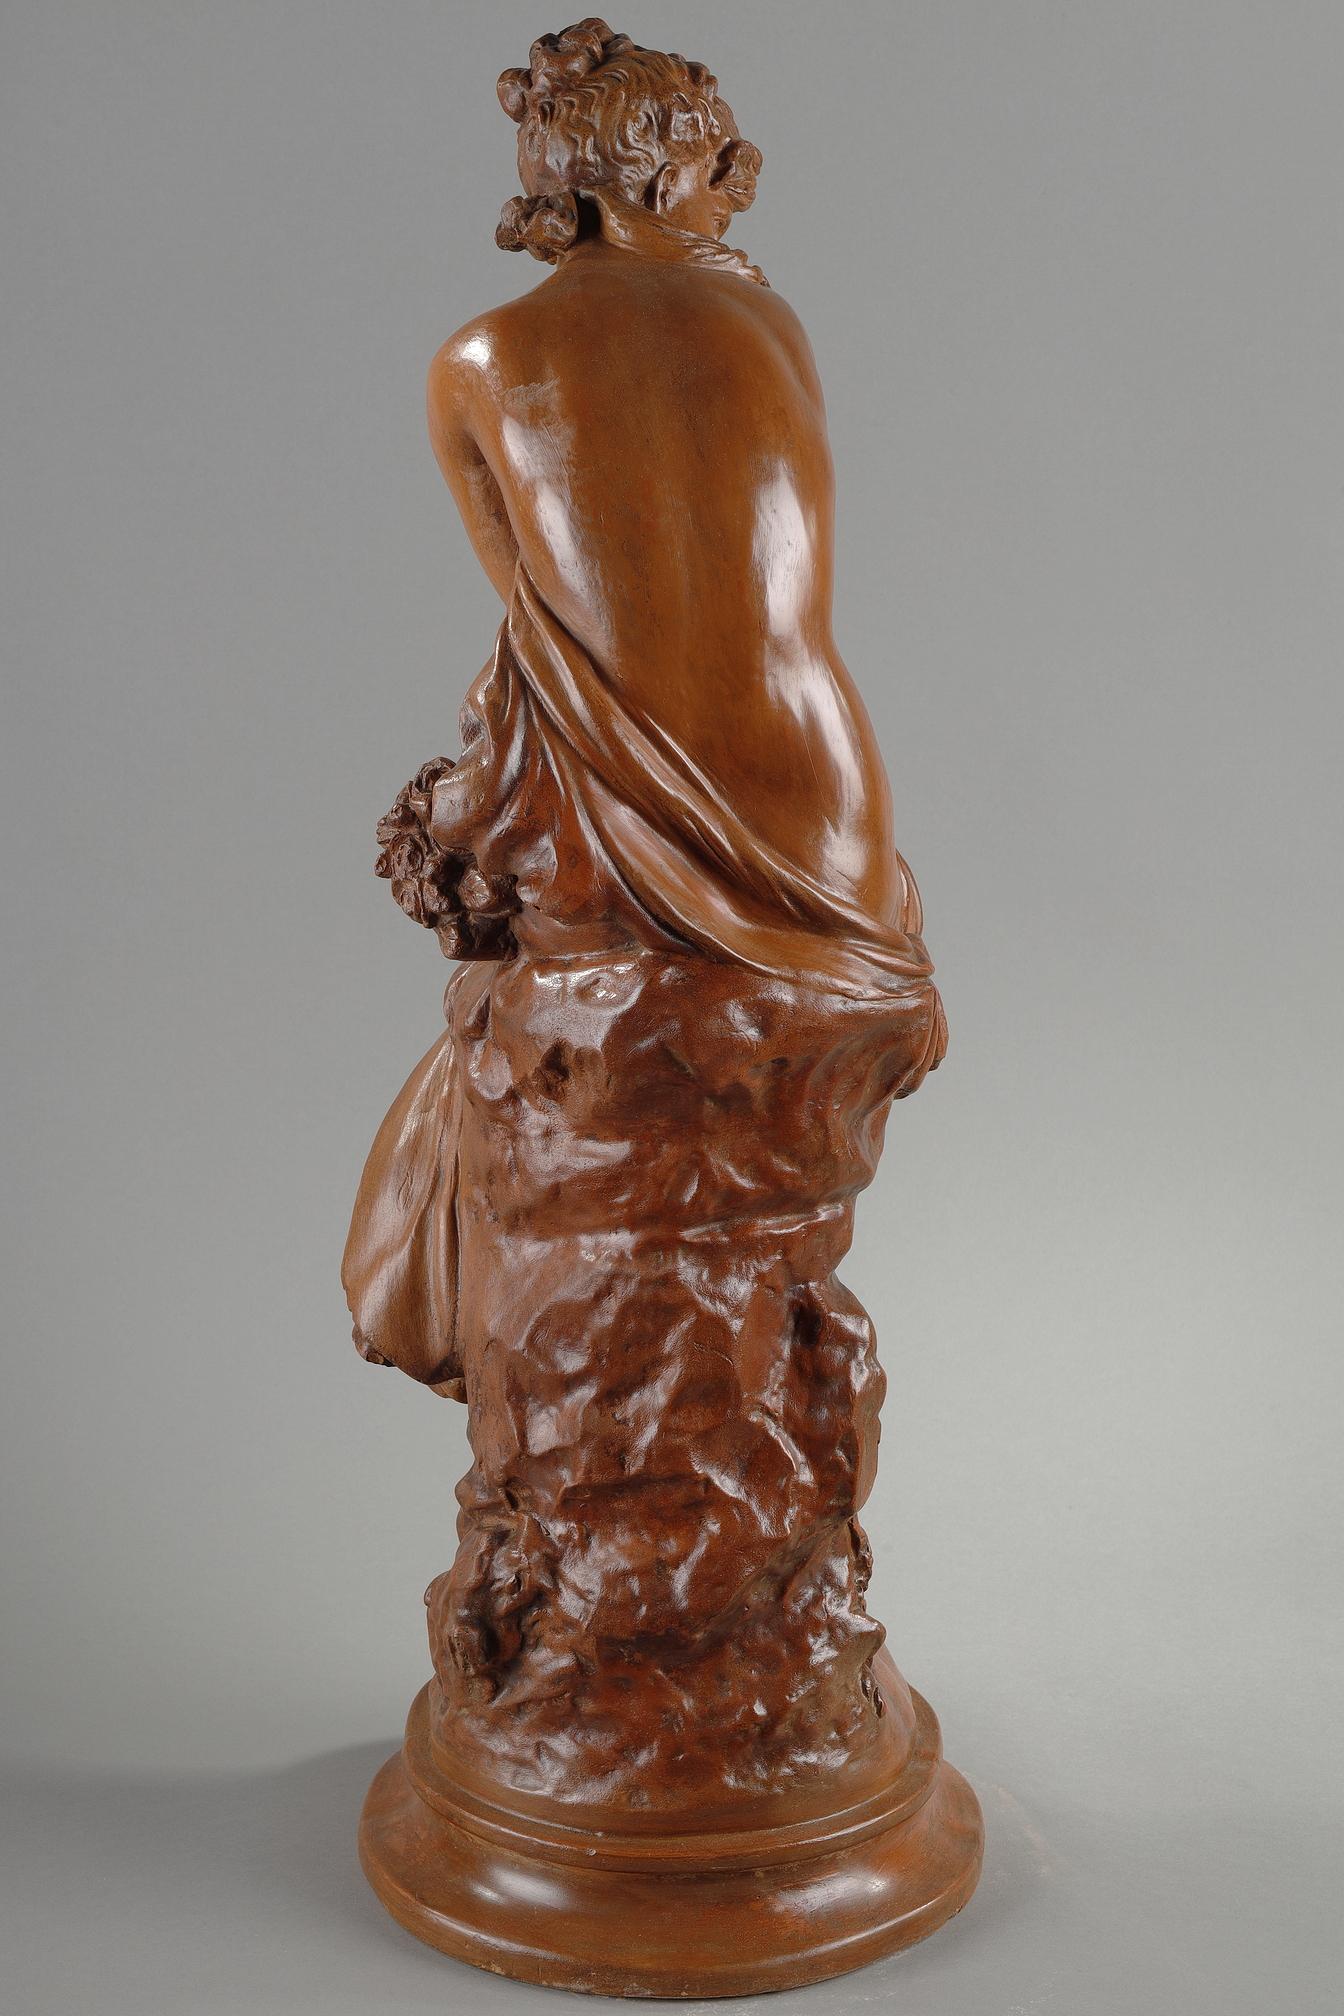 Patinated terracotta sculpture signed by Mathurin Moreau 1